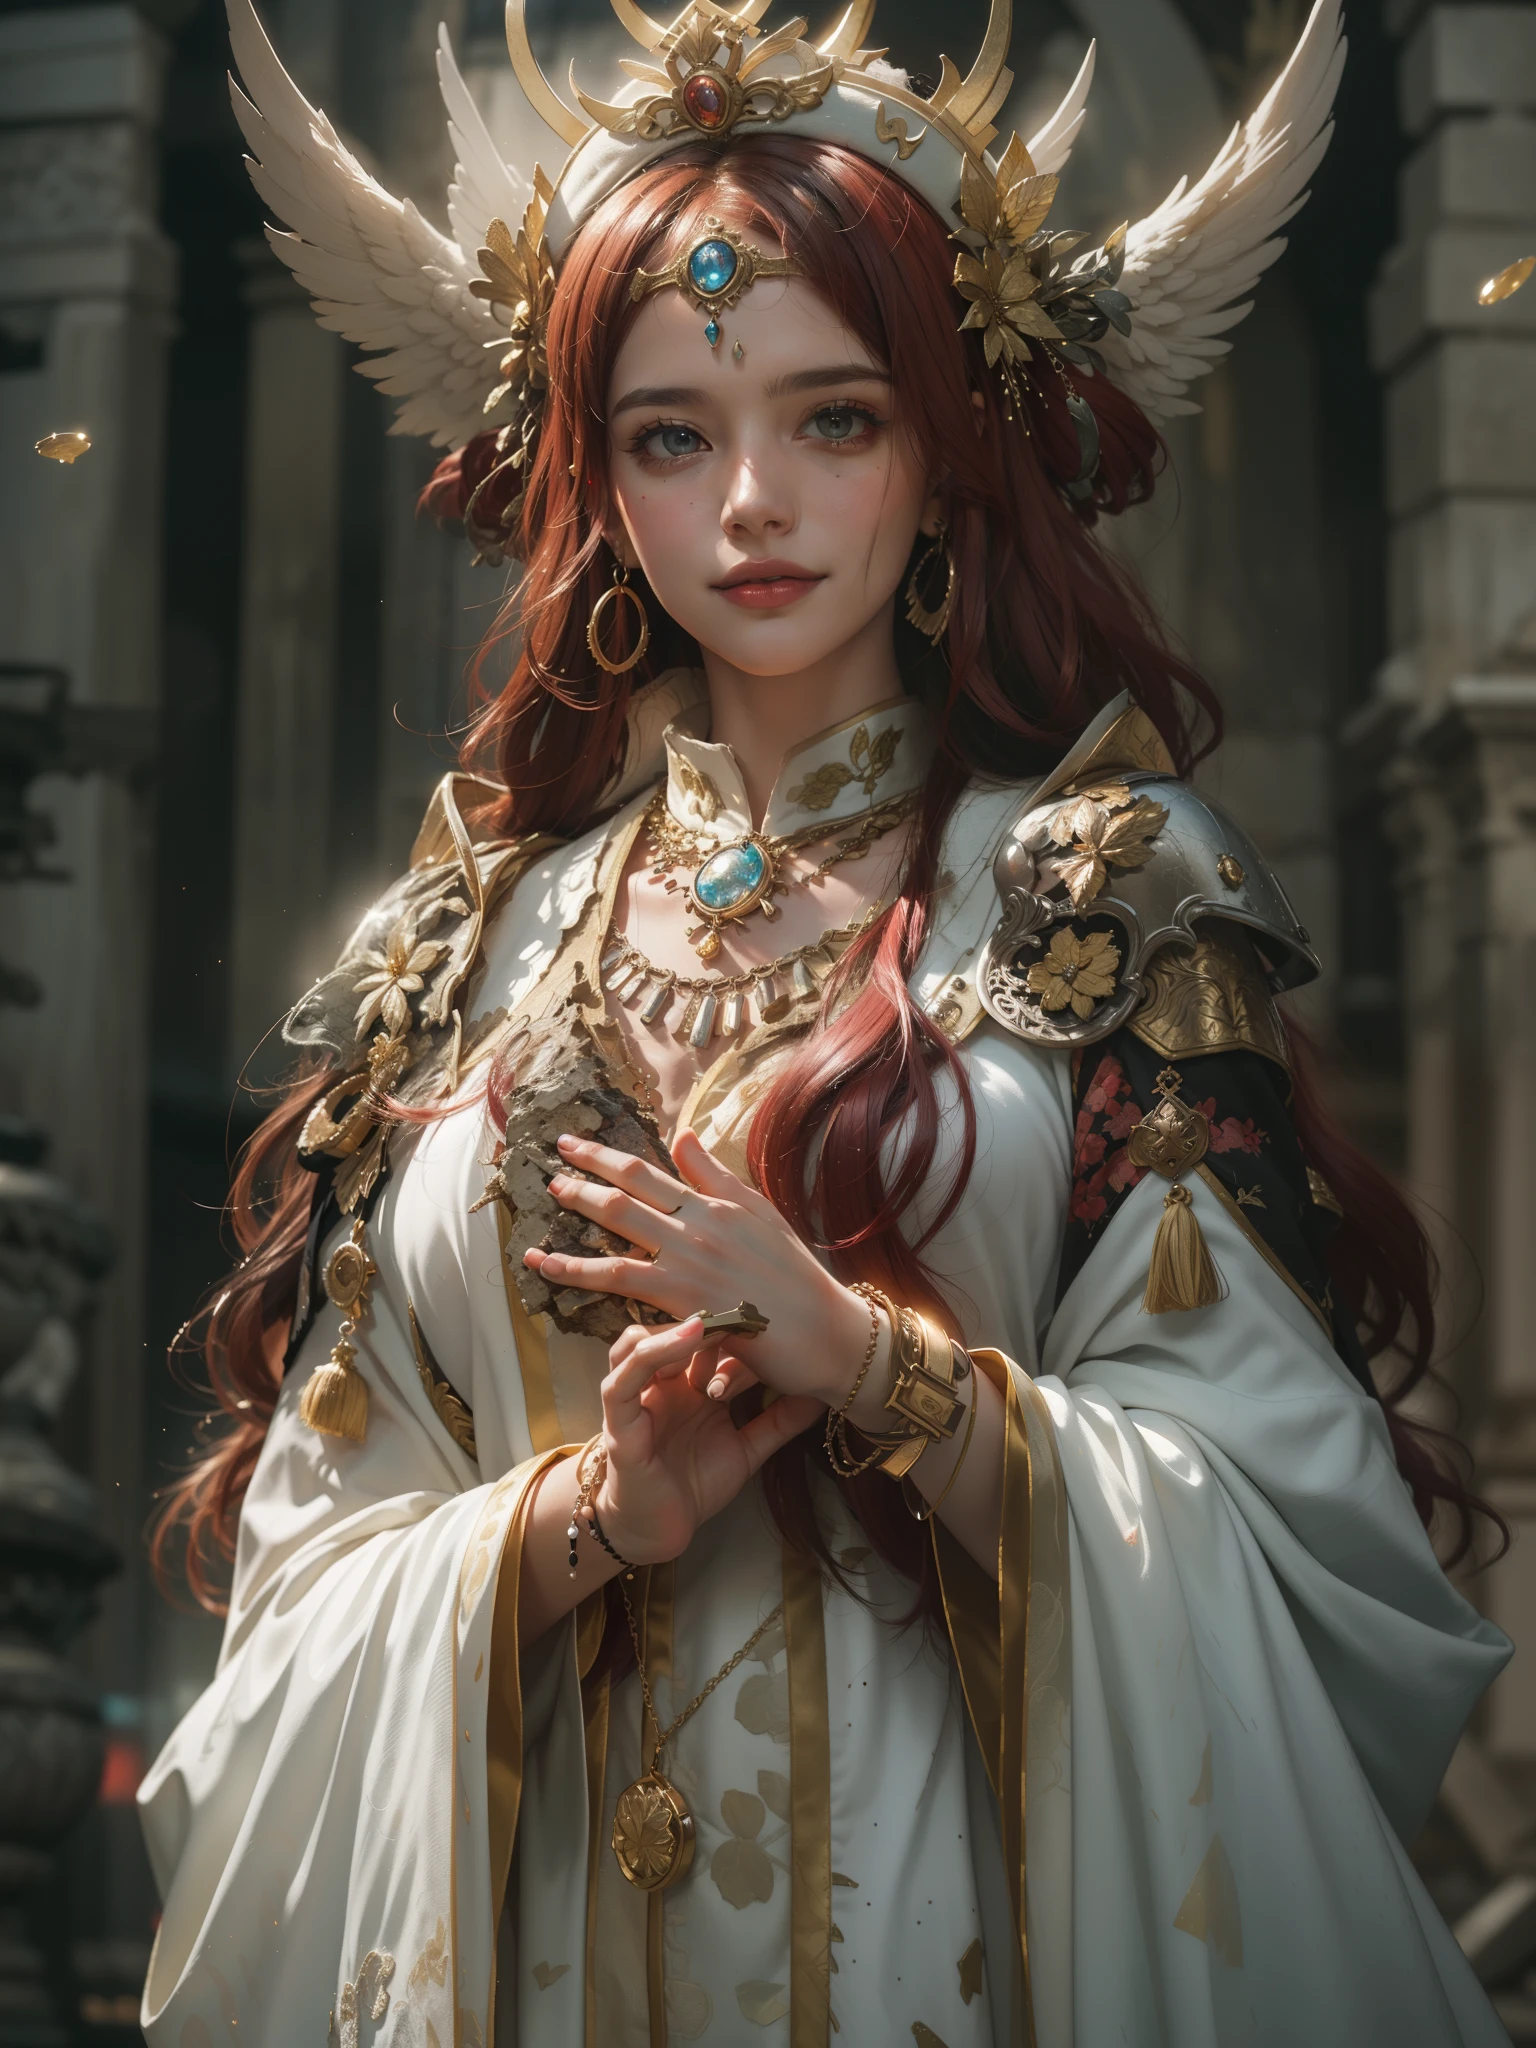 (Numerous award-winning masterpieces, with incredible detail, textures and maximum detail), (hyper realistic:1.4), (realistic:1.3), (upper body up:0.4), (best quality real texture skin), ((medieval world)), finely detailed eyes, finely detailed face, (female clergy in white), (female priestess in white), (female clergy in black), (female priestess in black), Gentle eyes, (She has a mischievous smile on her face:1.4), Friendly and girlish face, (Some angels soaring overhead), Glass earrings on the ears, (dramatic photo:1.6), Shining majestic cloud masses and sky, (Mysterious light), (halo optical phenomenon:1.5), (Sacred Light), twilight, sunset, dusk, (Dramatic Light), (A majestic sight), (Her expression  serene full of tenderness and very beautiful), (Noble posture), (red hair, chestnut hair), ((Full-length portrait)), ((looks up)), ((looking down)), (full-body standing image:1.5), (Around her neck  a  and sacred necklace of exquisite workmanship), large temple edifice, Old ruins infested with plants, great temple, great cathedral, great shrine, temple ruins, detached temple, (Luminous magic circle), Ruins of an ancient castle, Deserted ruins, crumbling ruins, Ancient ruins with clear water, epic realistic, faded, art, (Greg rutkowski:0.8), (teal and orange:0.4), (art station:1.5), cinematic, ((neutral colors)), (hdr:1.5), (muted colors:1.2), hyper detailed, dramatic light, (intricate details:1.1), complex background,